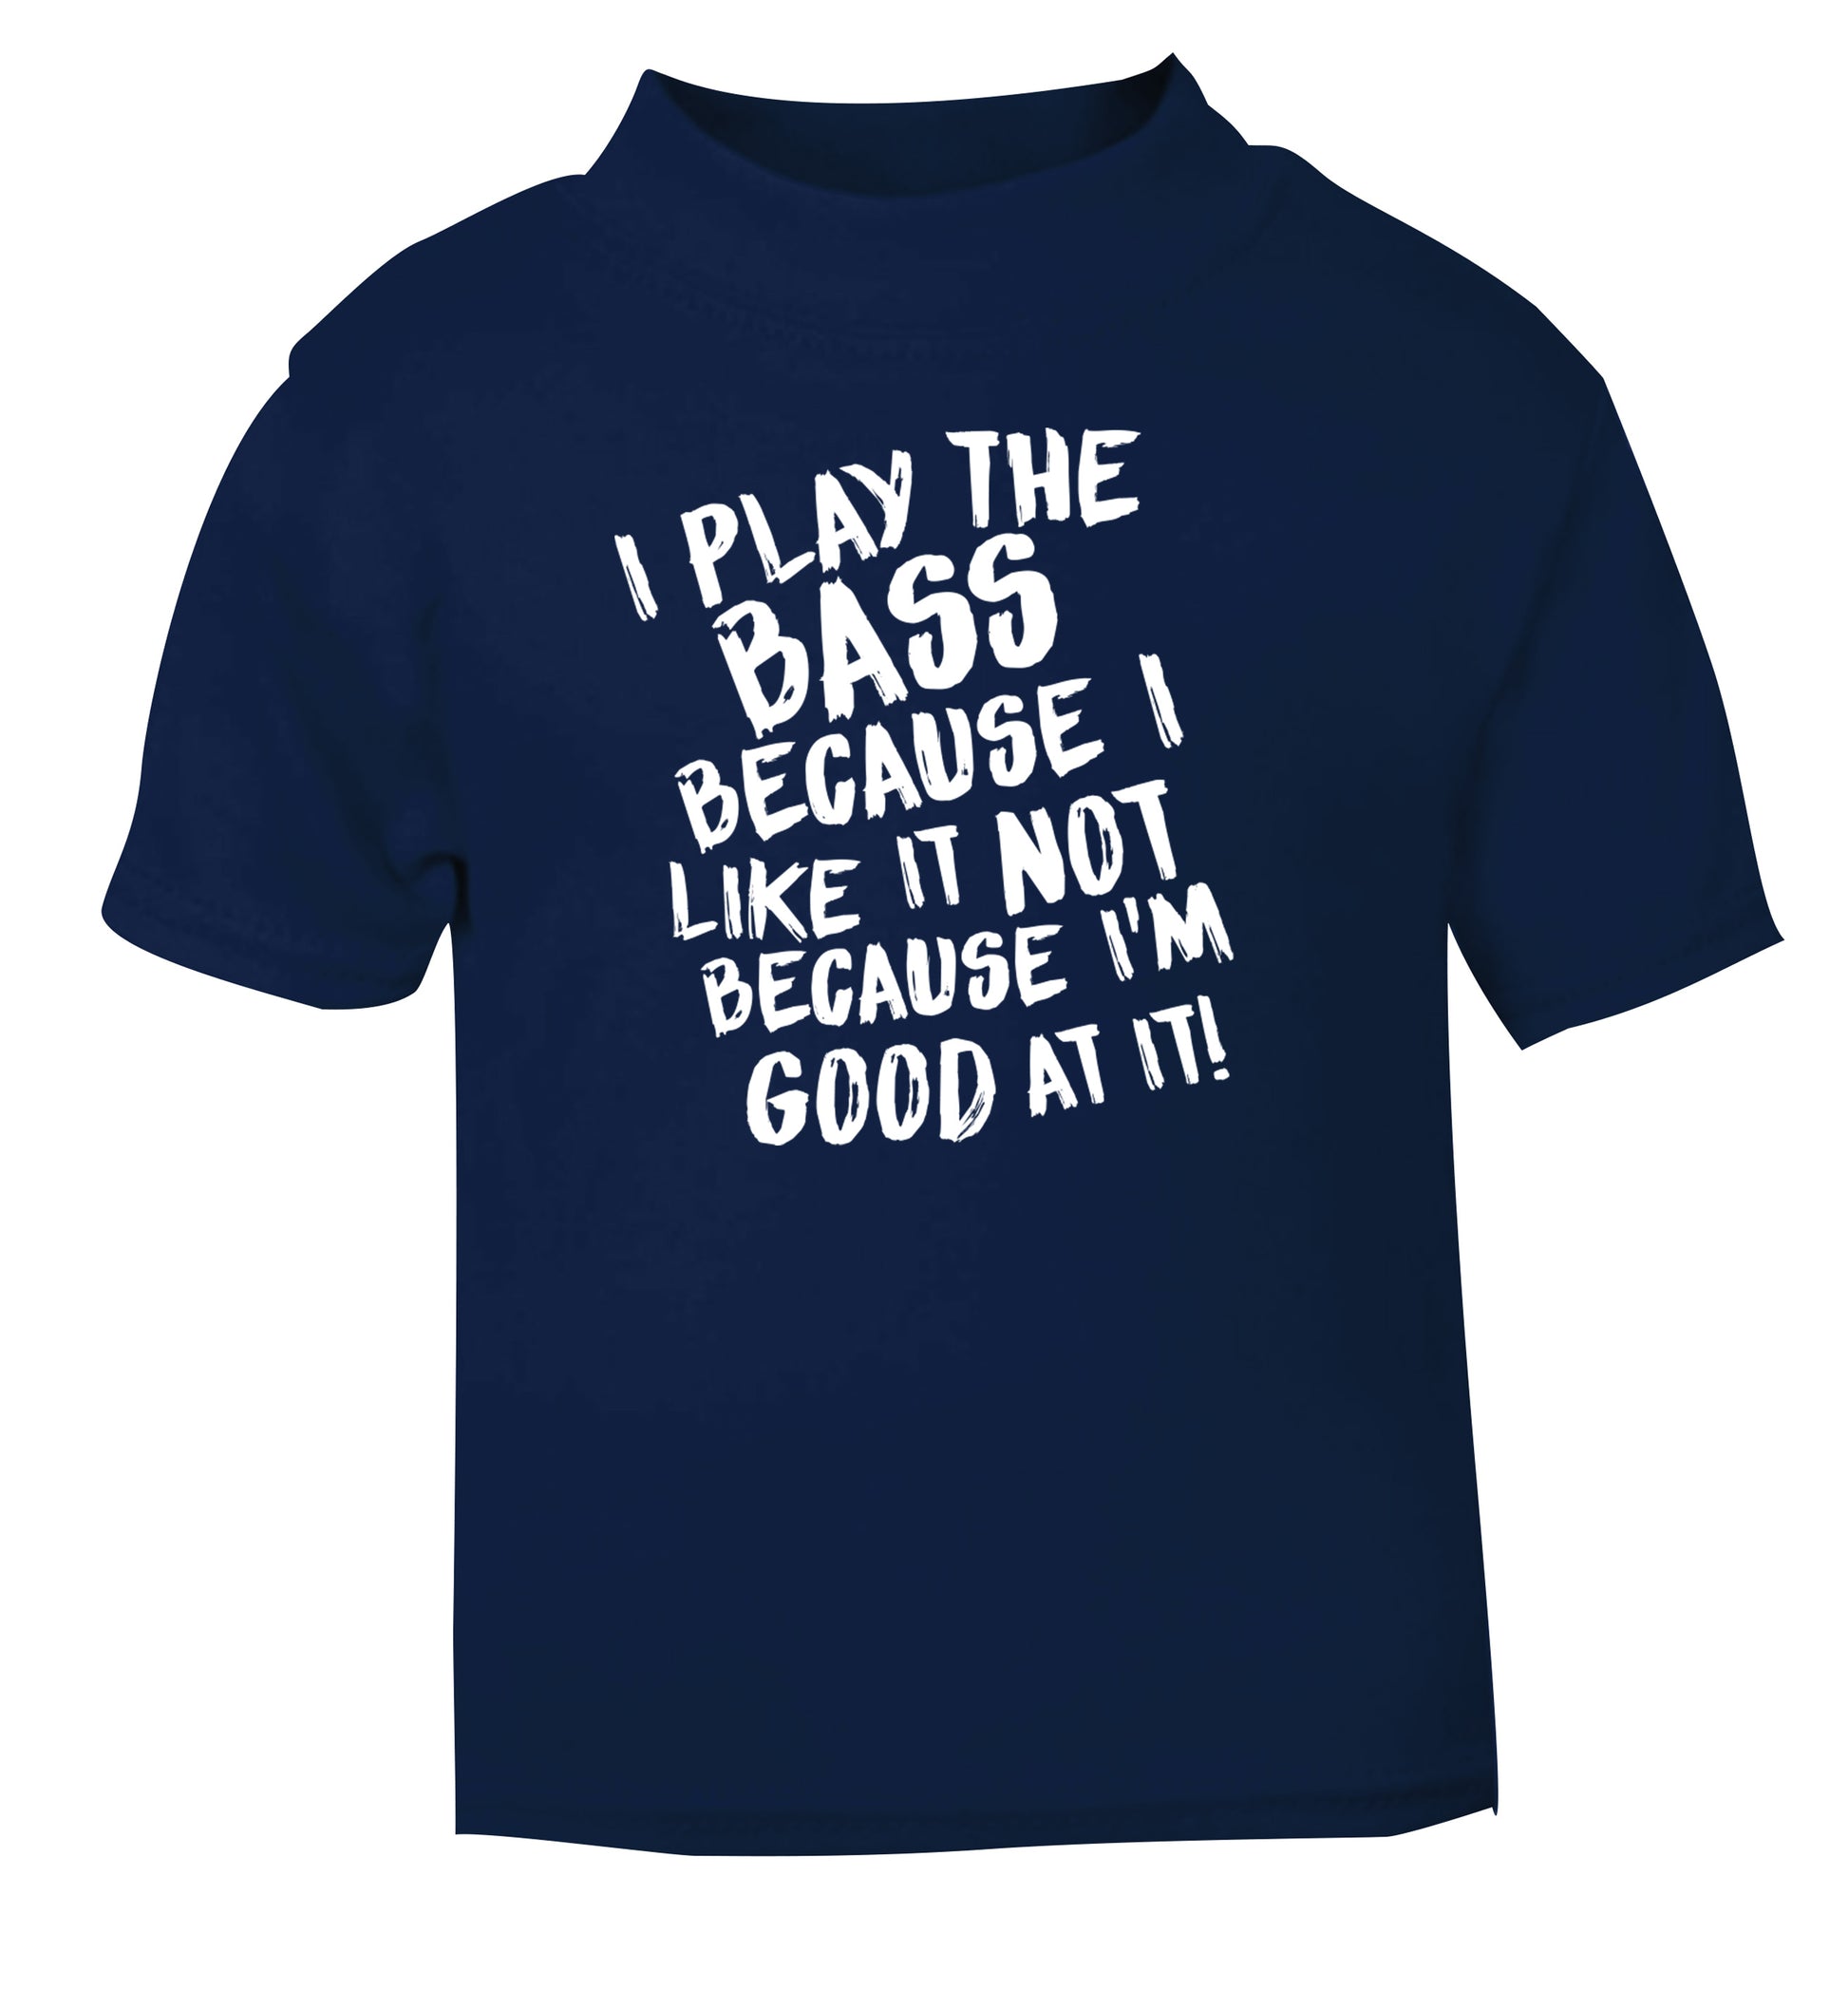 I play the bass because I like it not because I'm good at it navy Baby Toddler Tshirt 2 Years